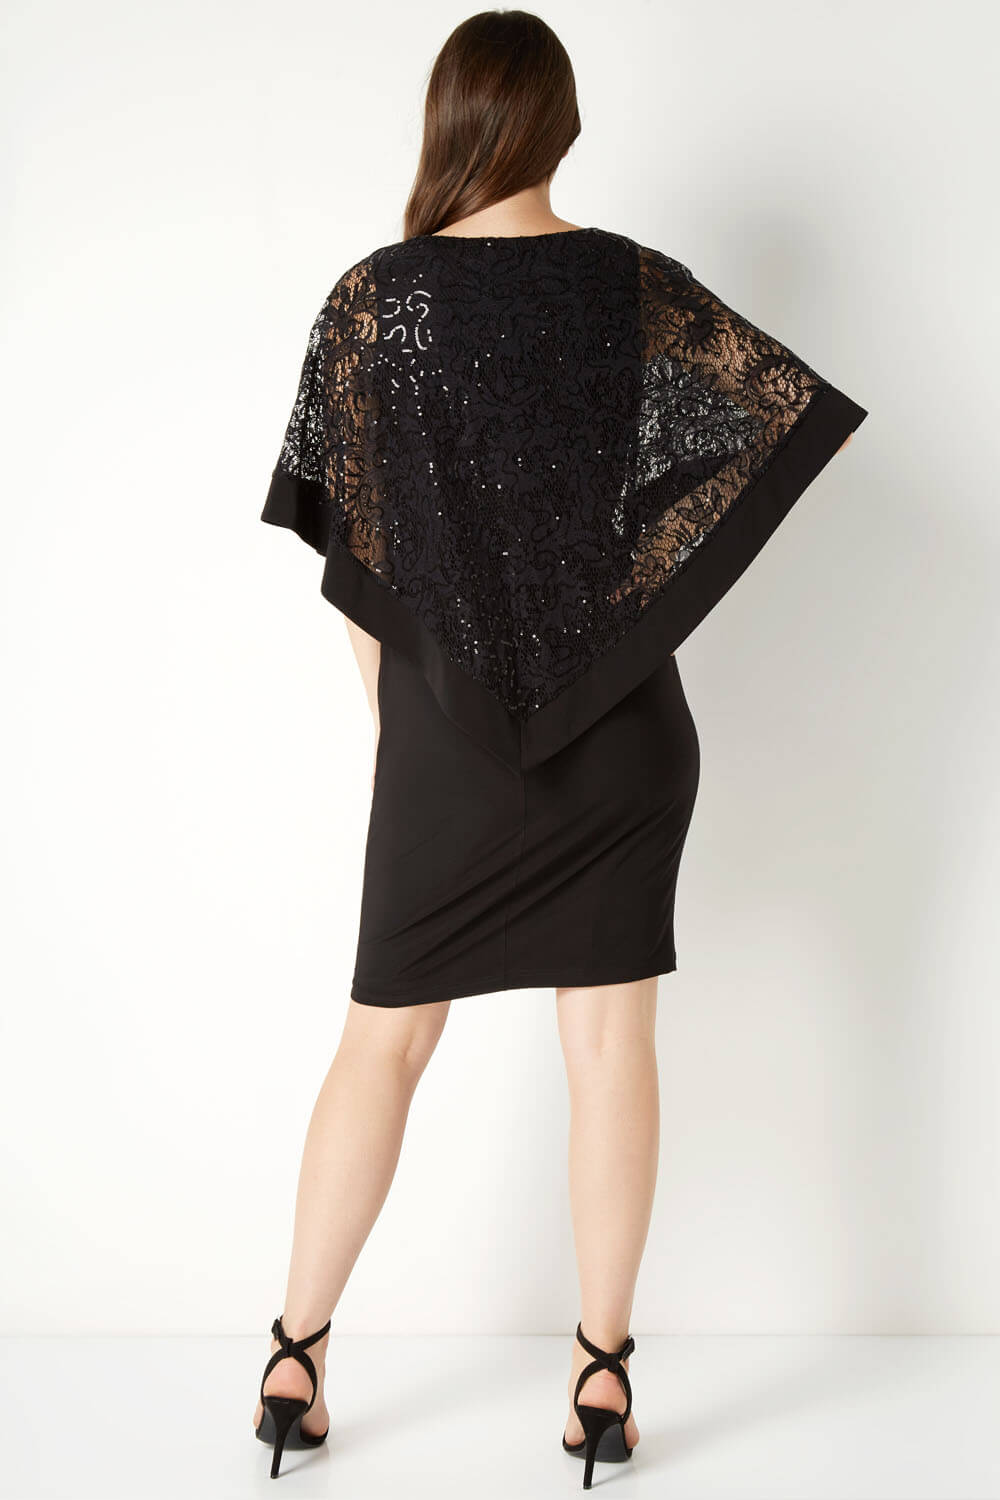 Black Sequin Lace Overlay Dress, Image 3 of 4